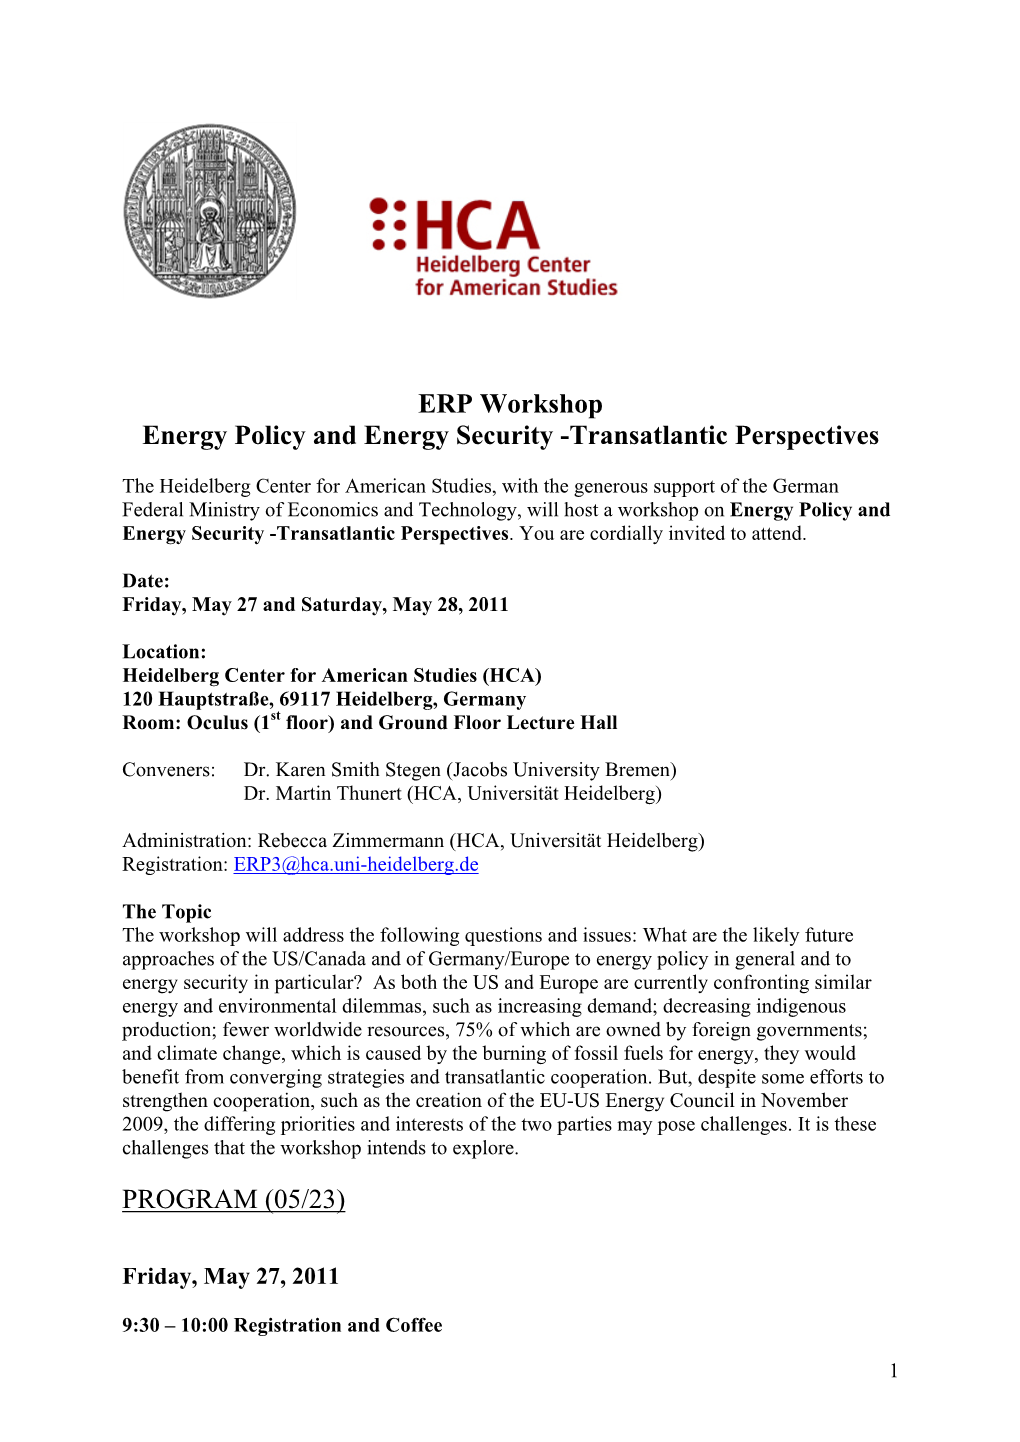 ERP Workshop Energy Policy and Energy Security -Transatlantic Perspectives